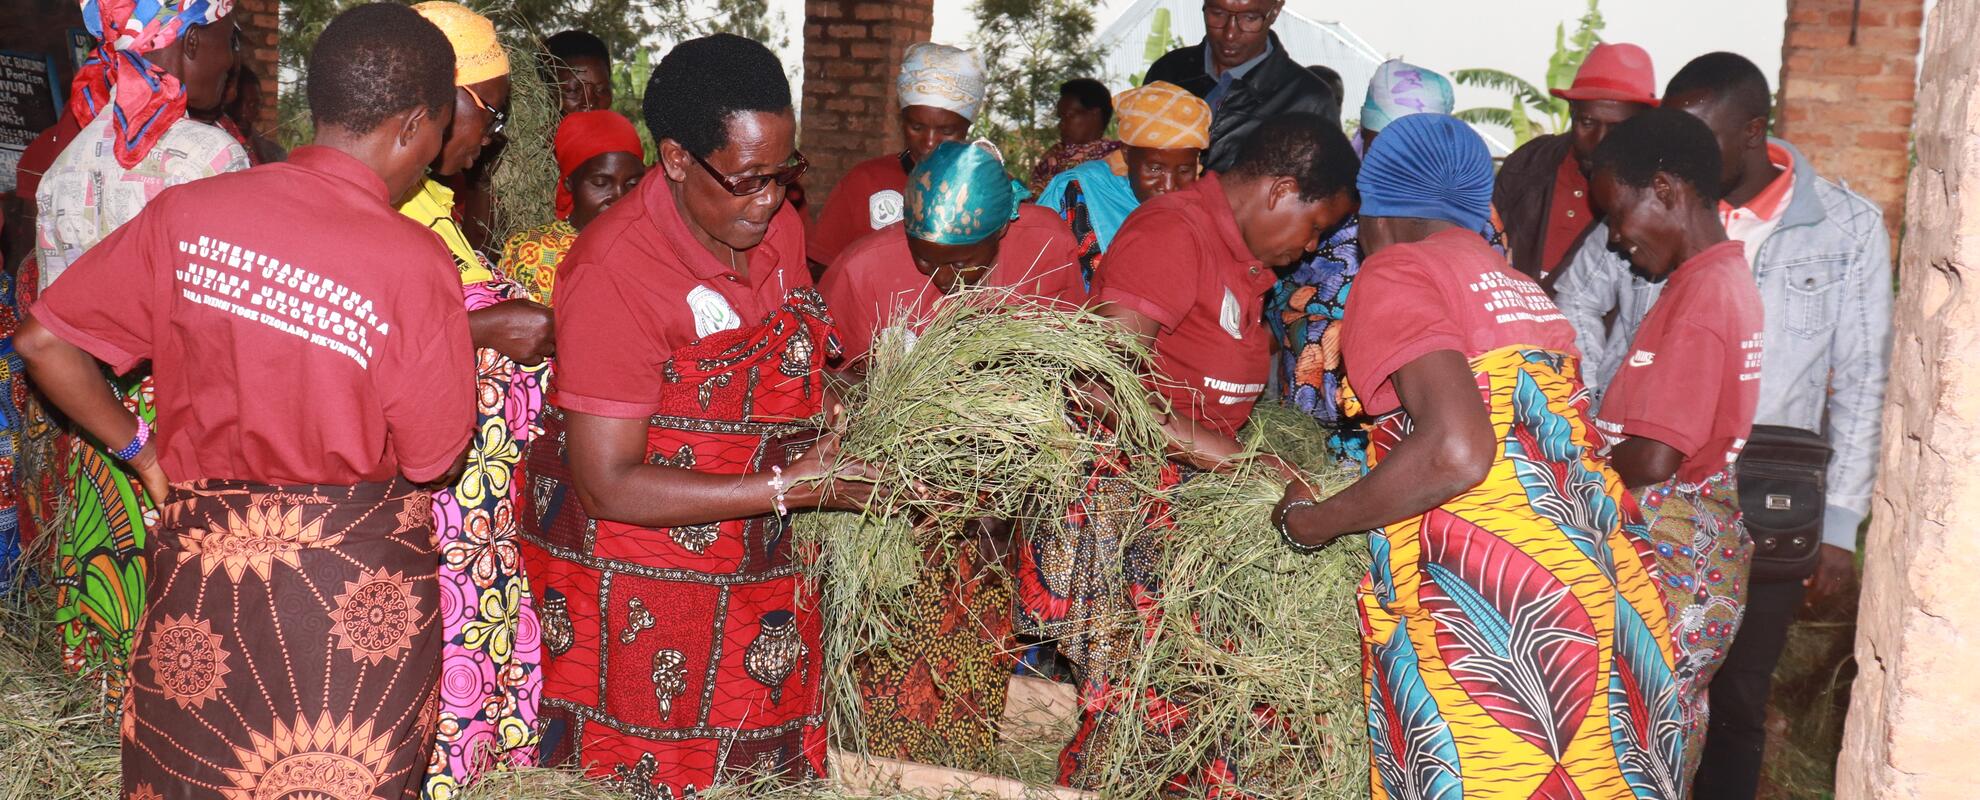 Members of Kigamba Cooperative of Cankuzo Province after a success hay preparation session during the training